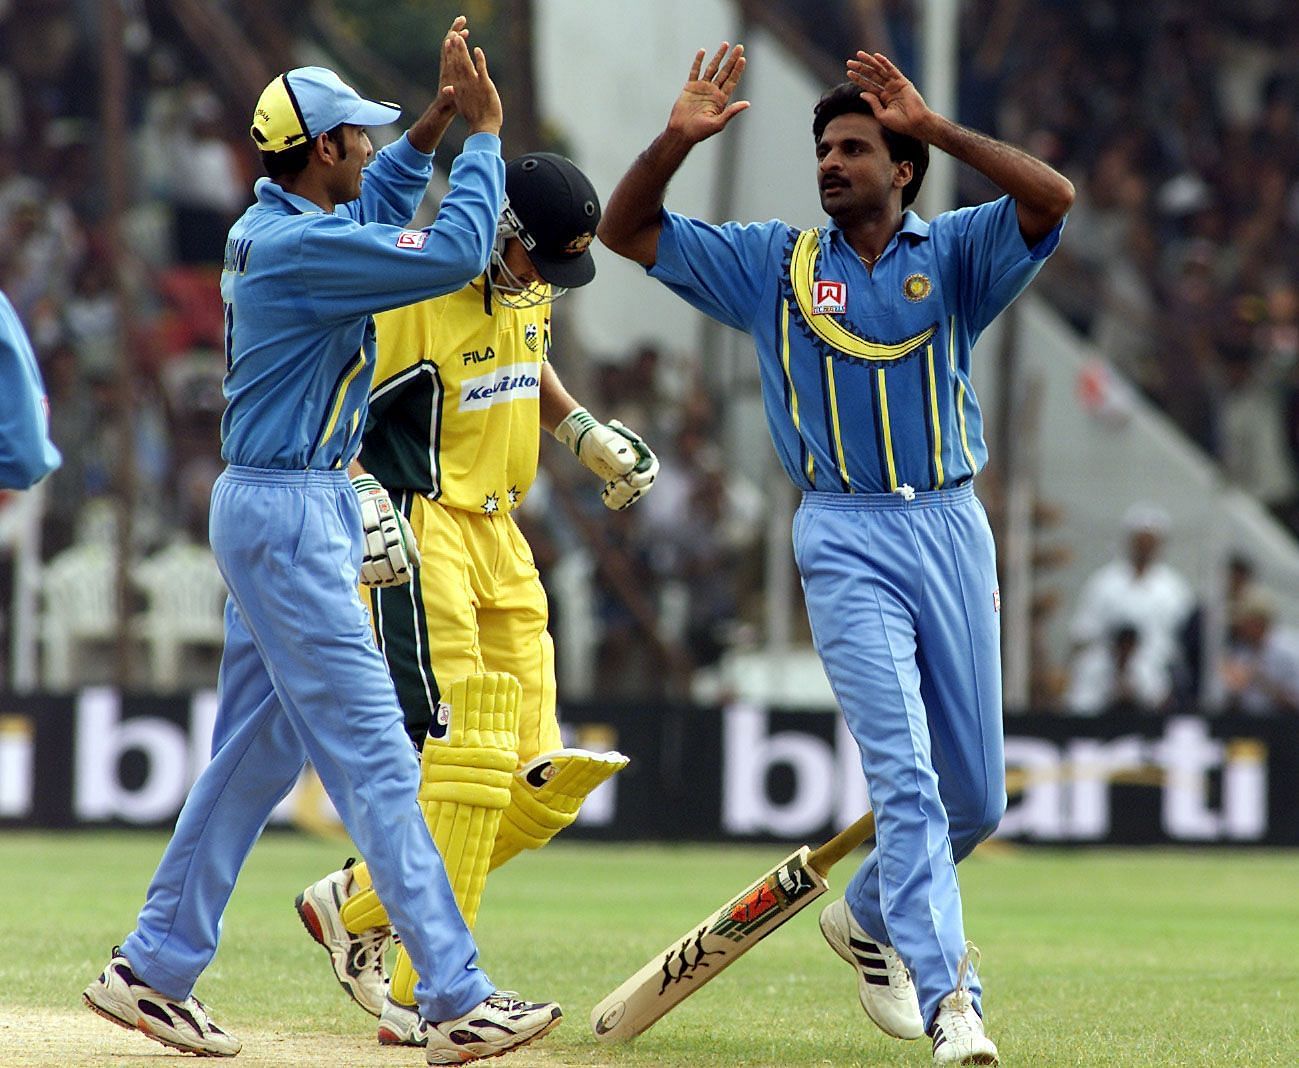 Javagal Srinath would have been a terrific T20 bowler